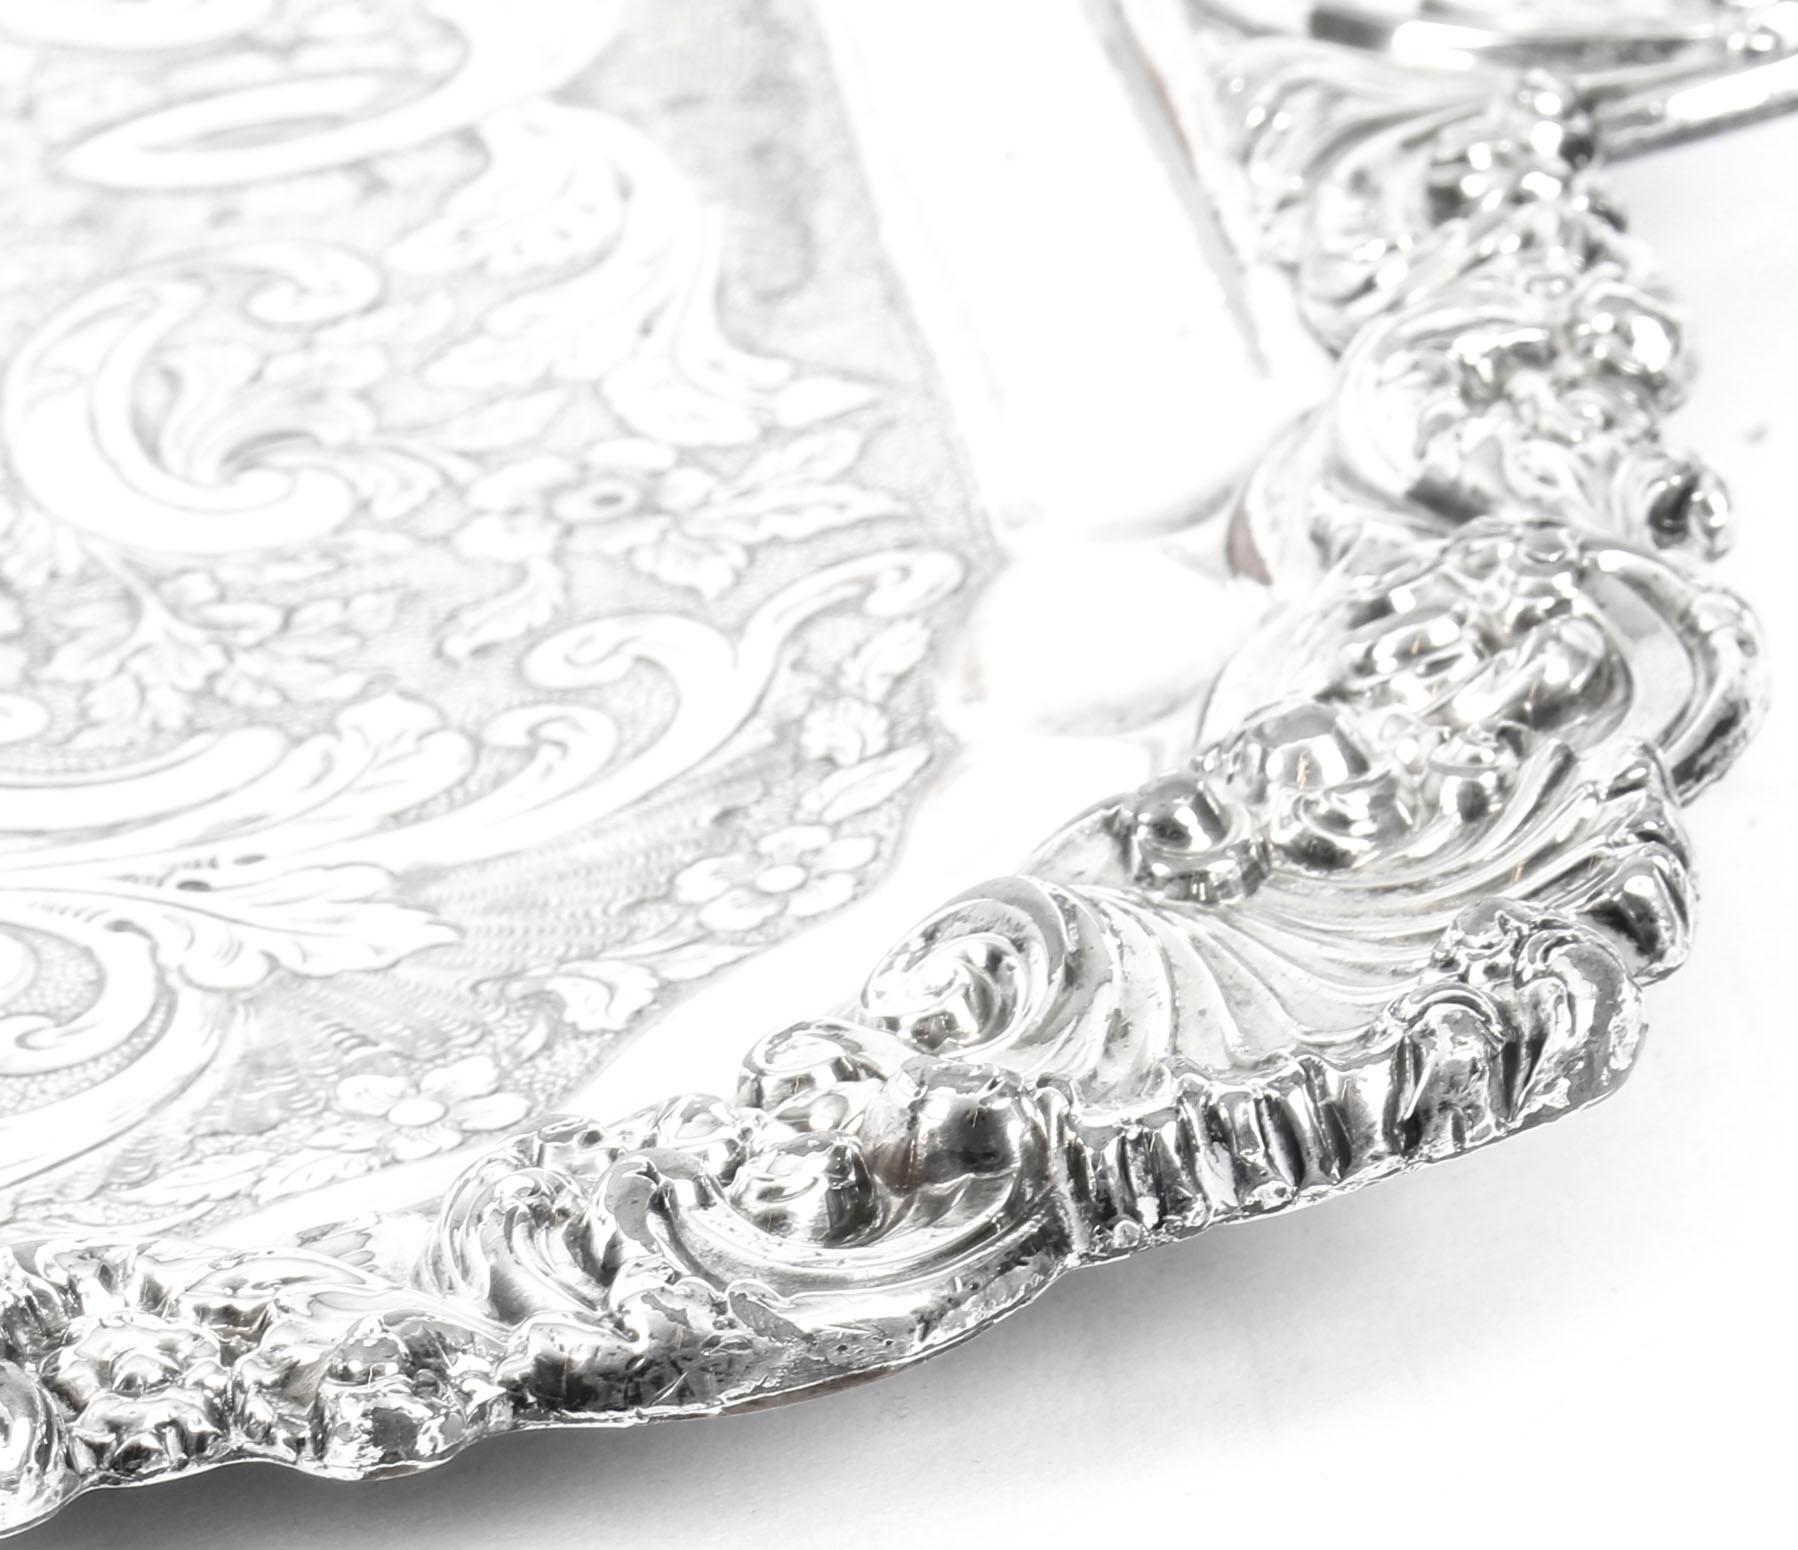 Sheffield Plate 19th Century Regency Old Sheffield Silver Plated Tray with Cavendo Tutus Crest